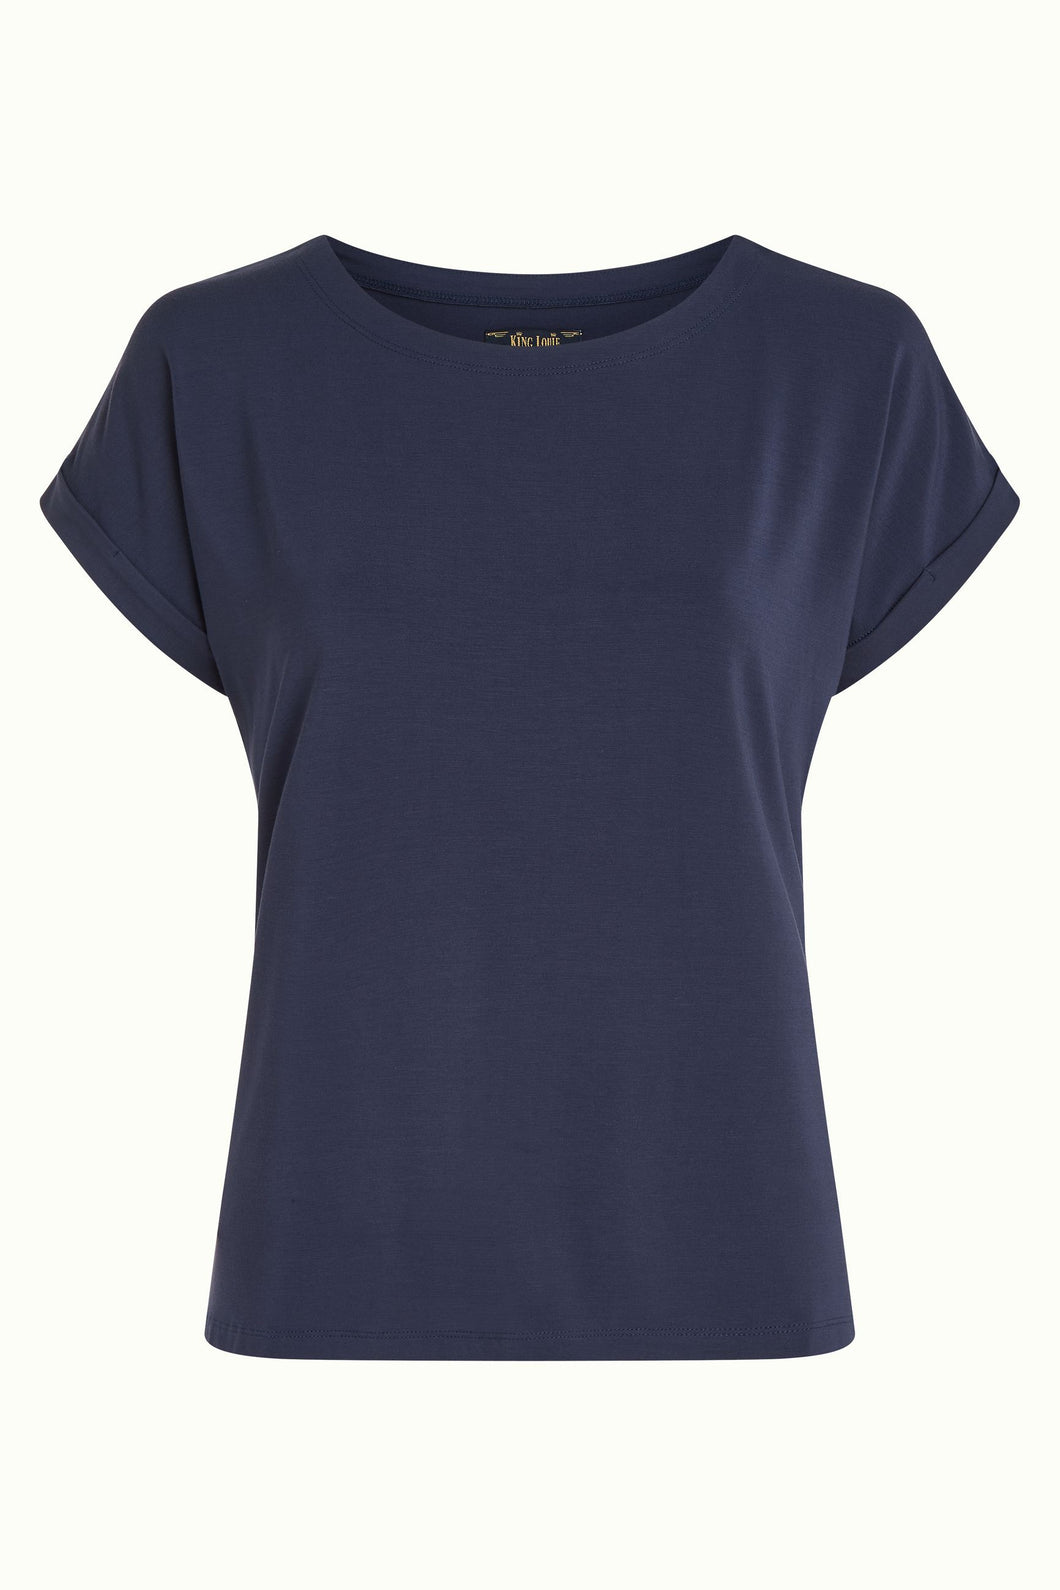 Shirt King Louie, Style: Aria Top Caprice, Farbe: Evening Blue, *New in*